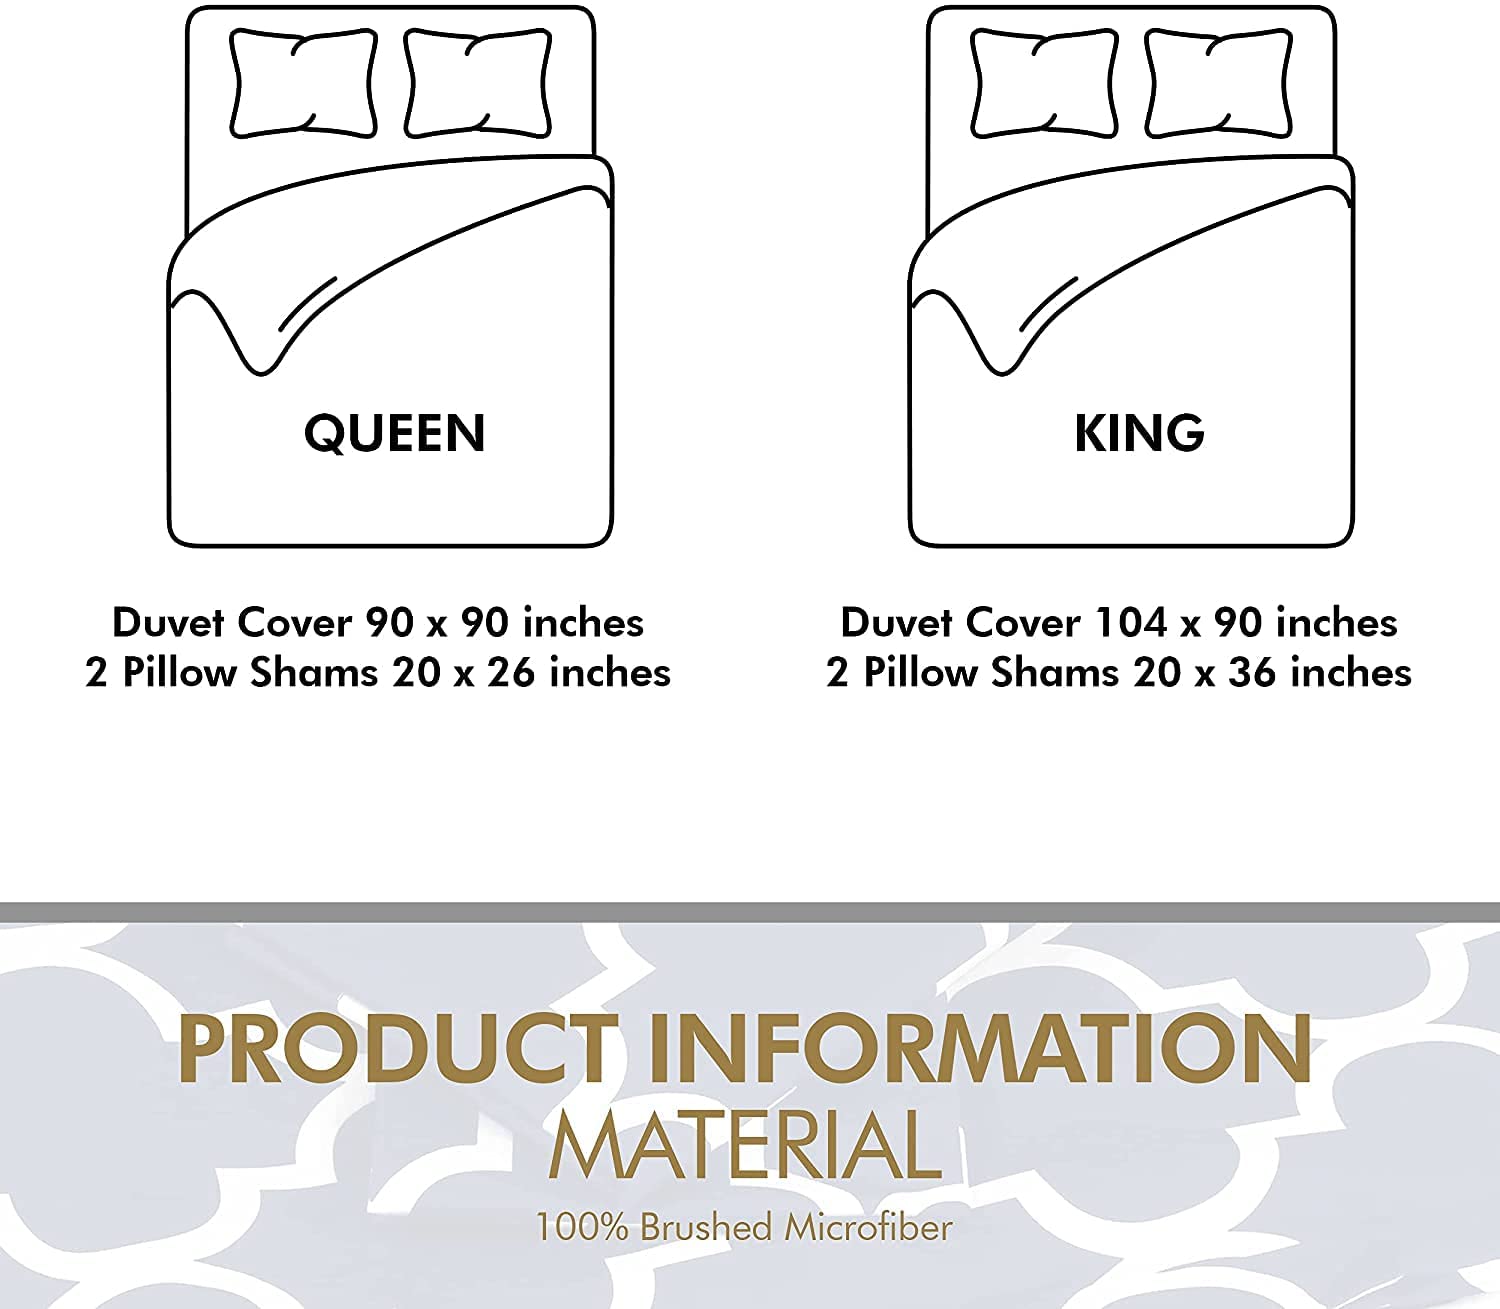 Utopia Bedding Duvet Cover King Size Set - 1 Duvet Cover with 2 Pillow  Shams - 3 Pieces Comforter Co…See more Utopia Bedding Duvet Cover King Size  Set